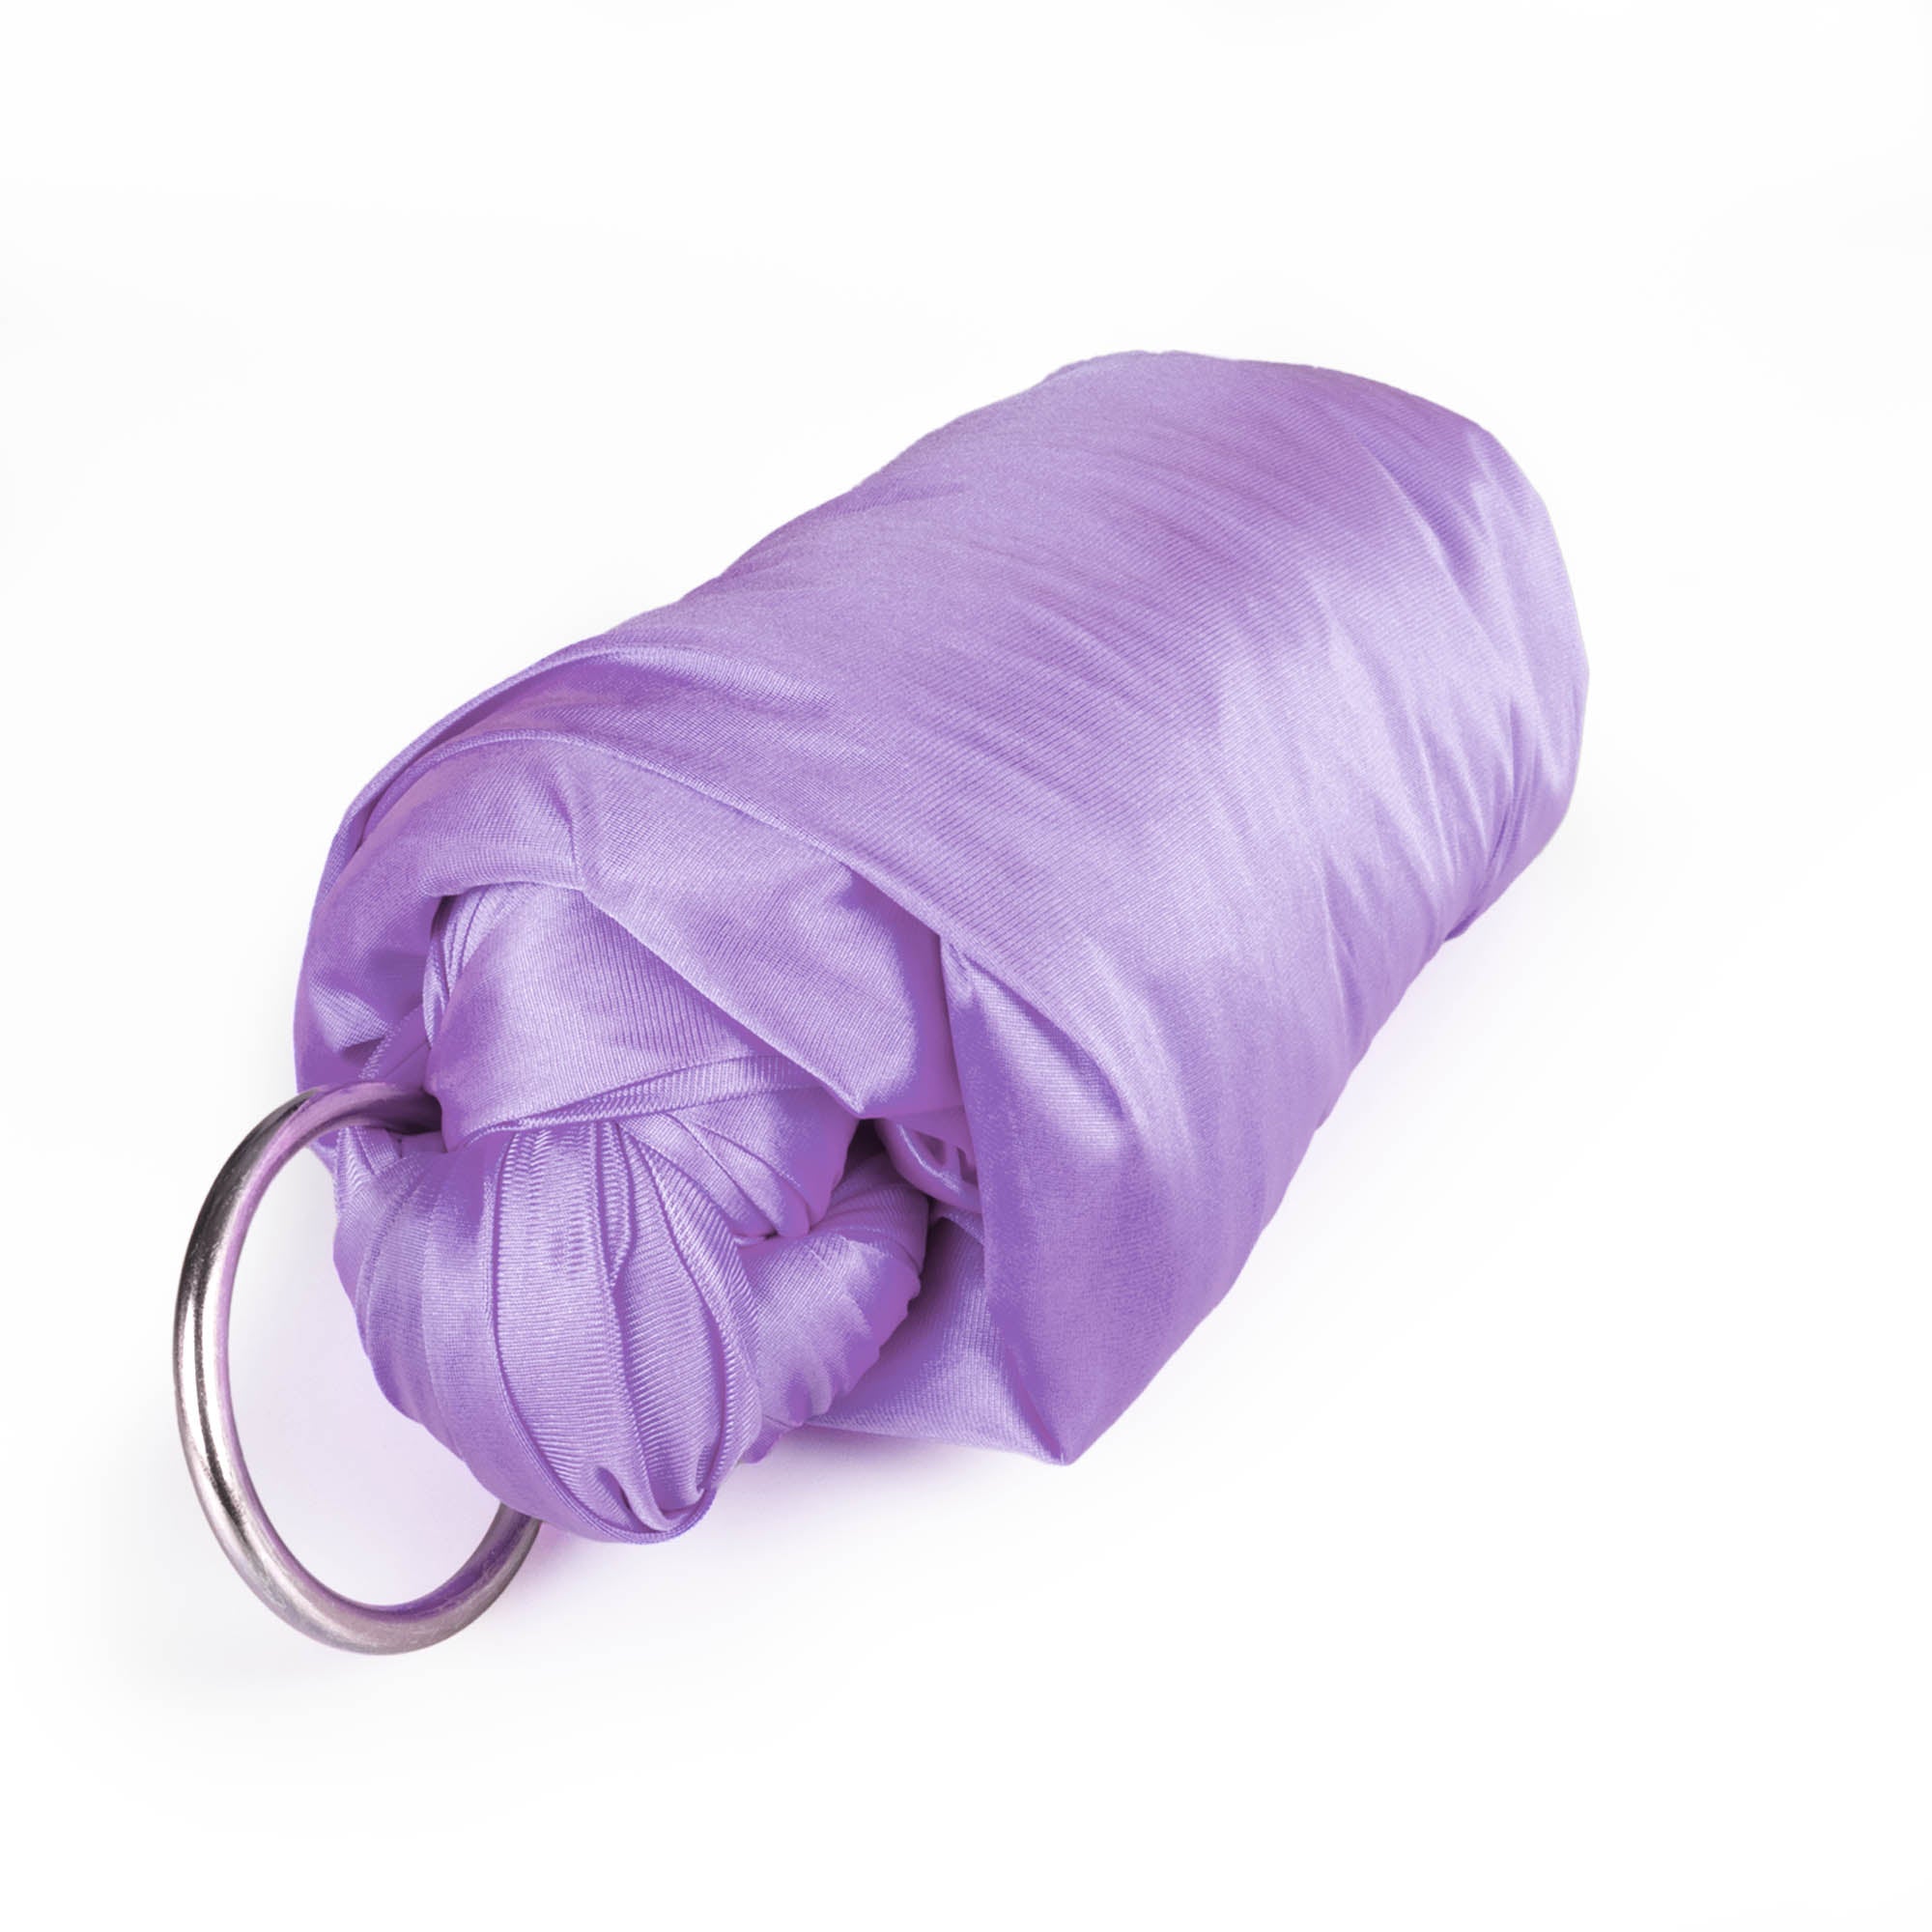 Lavender yoga hammock rolled up with rings attached